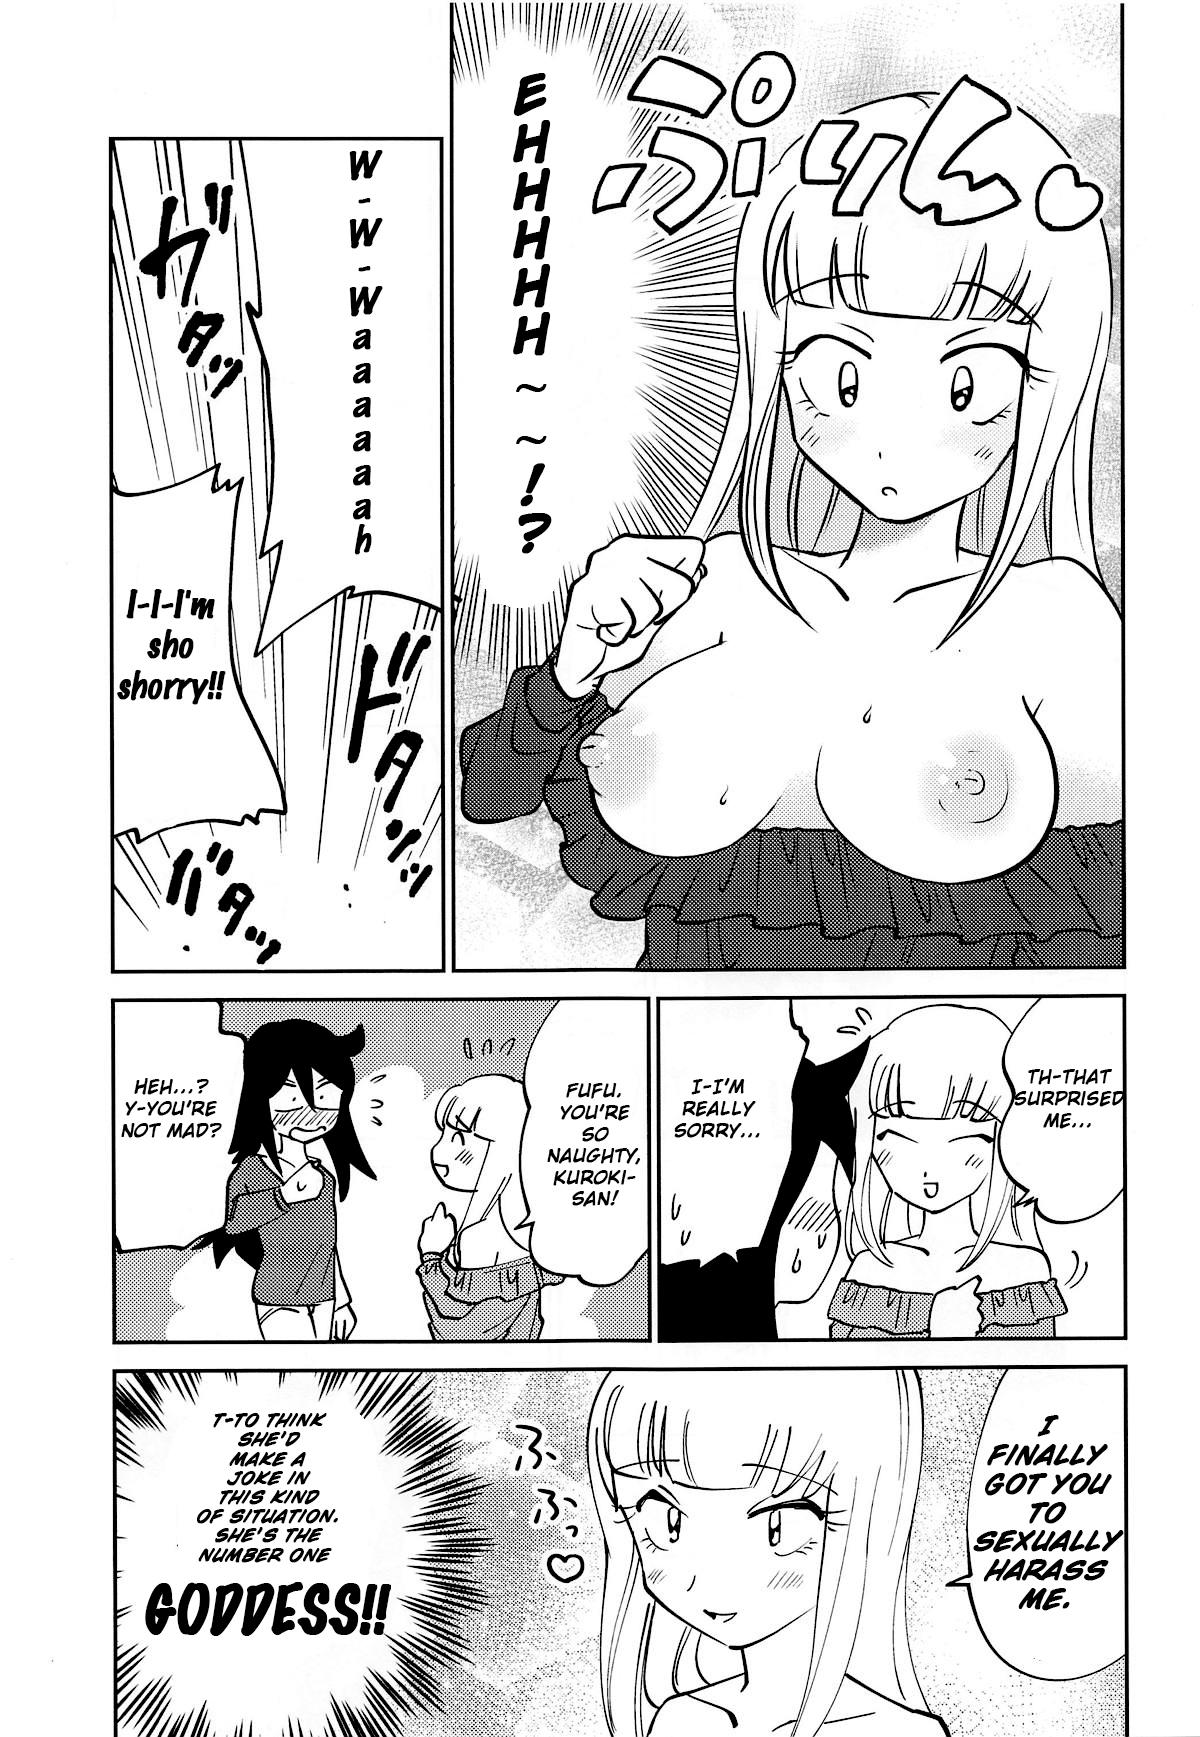 Argenta Kuroki-san, Anone. - Its not my fault that im not popular Naked - Page 10